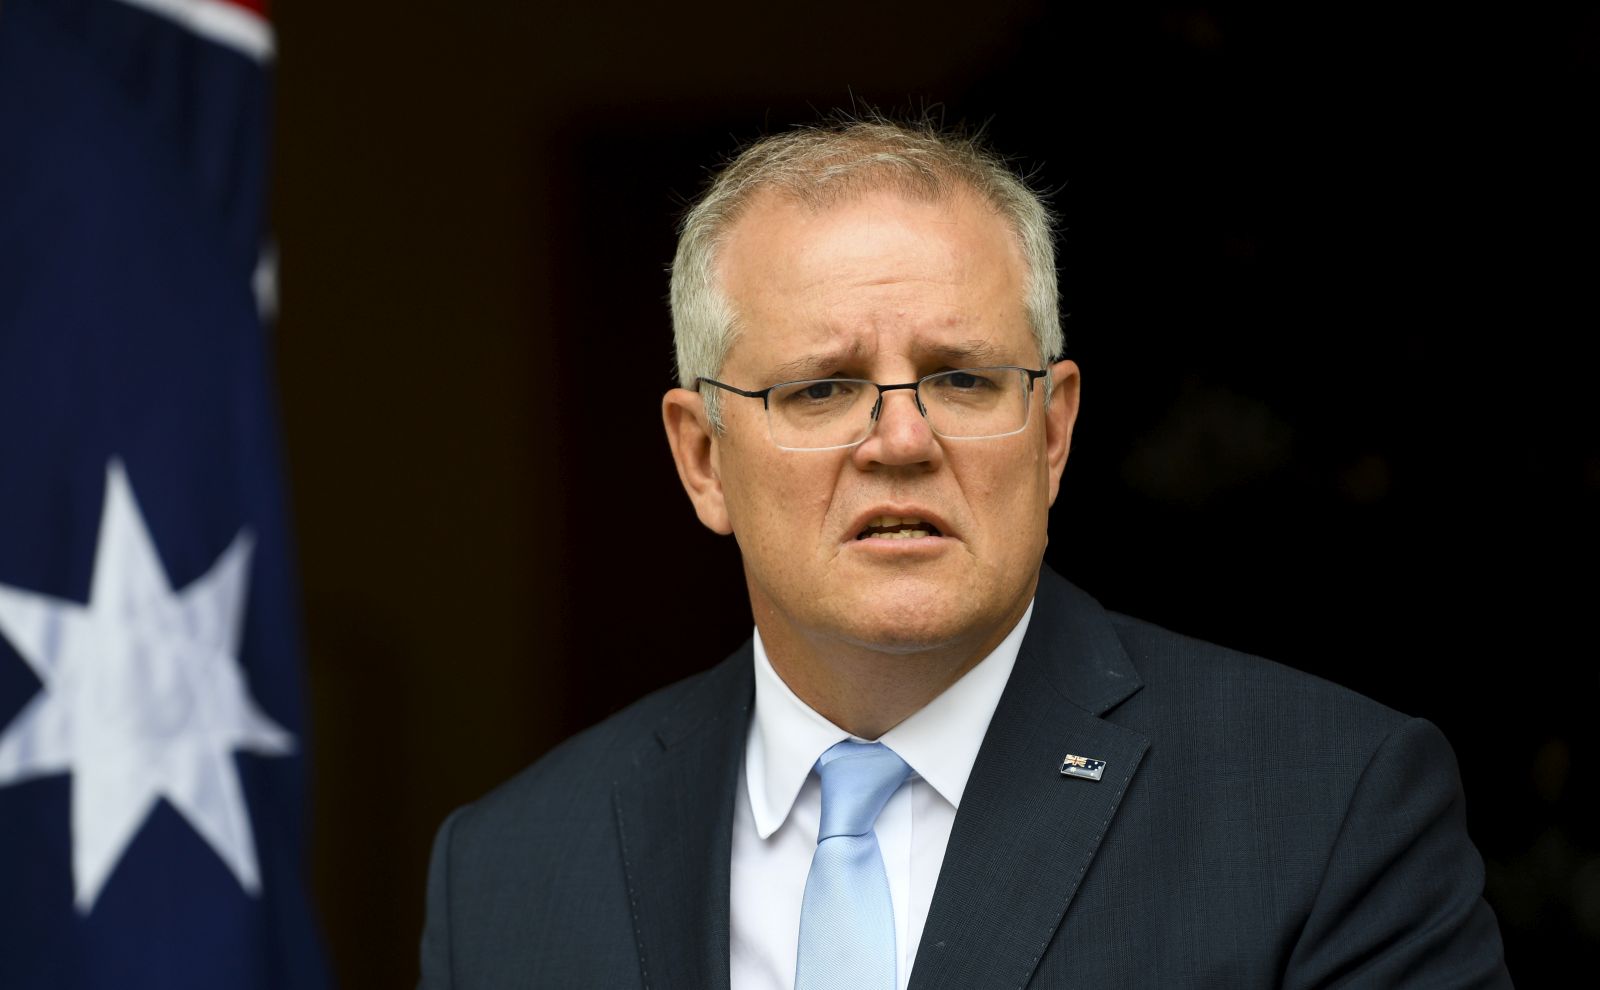 epa08890947 Australian Prime Minister Scott Morrison speaks to the media during a press conference at Parliament House in Canberra, Australia, 18 December 2020. Morrison spoke about the Cabinet reshuffle that occurred on the same day.  EPA/LUKAS COCH  AUSTRALIA AND NEW ZEALAND OUT